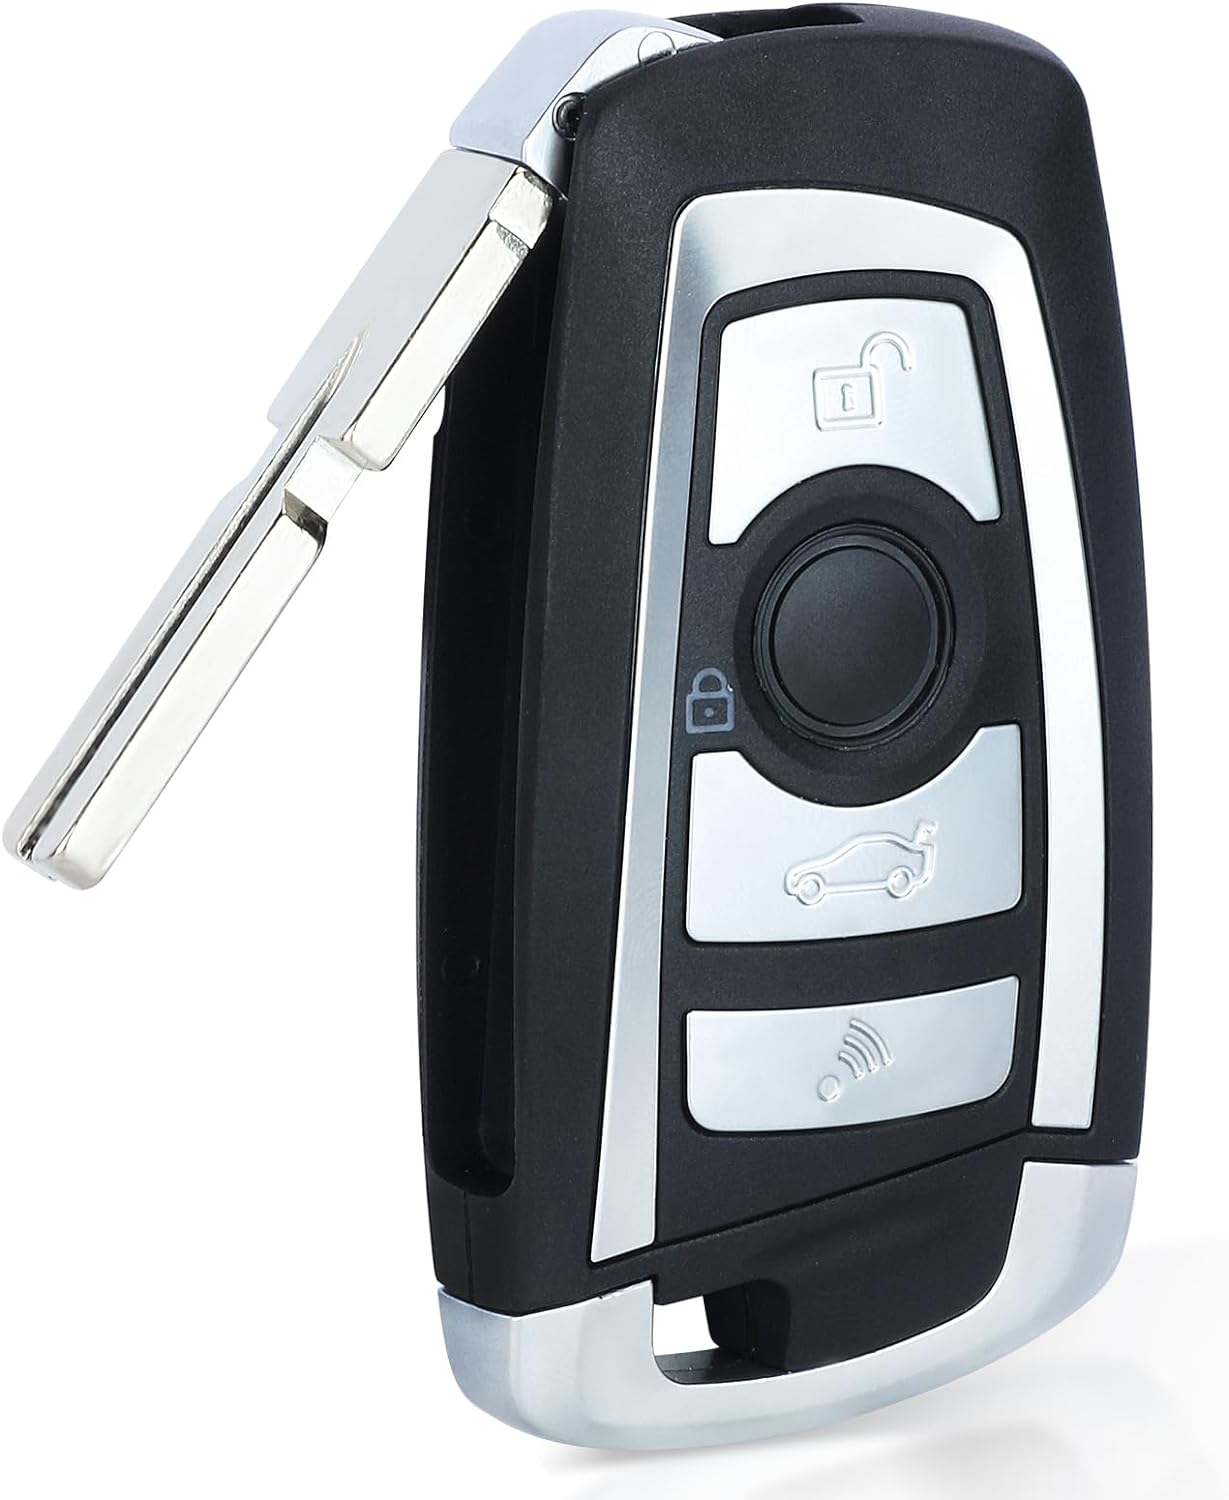 1998-2005 (Aftermarket) Remote key Shell for Bmw